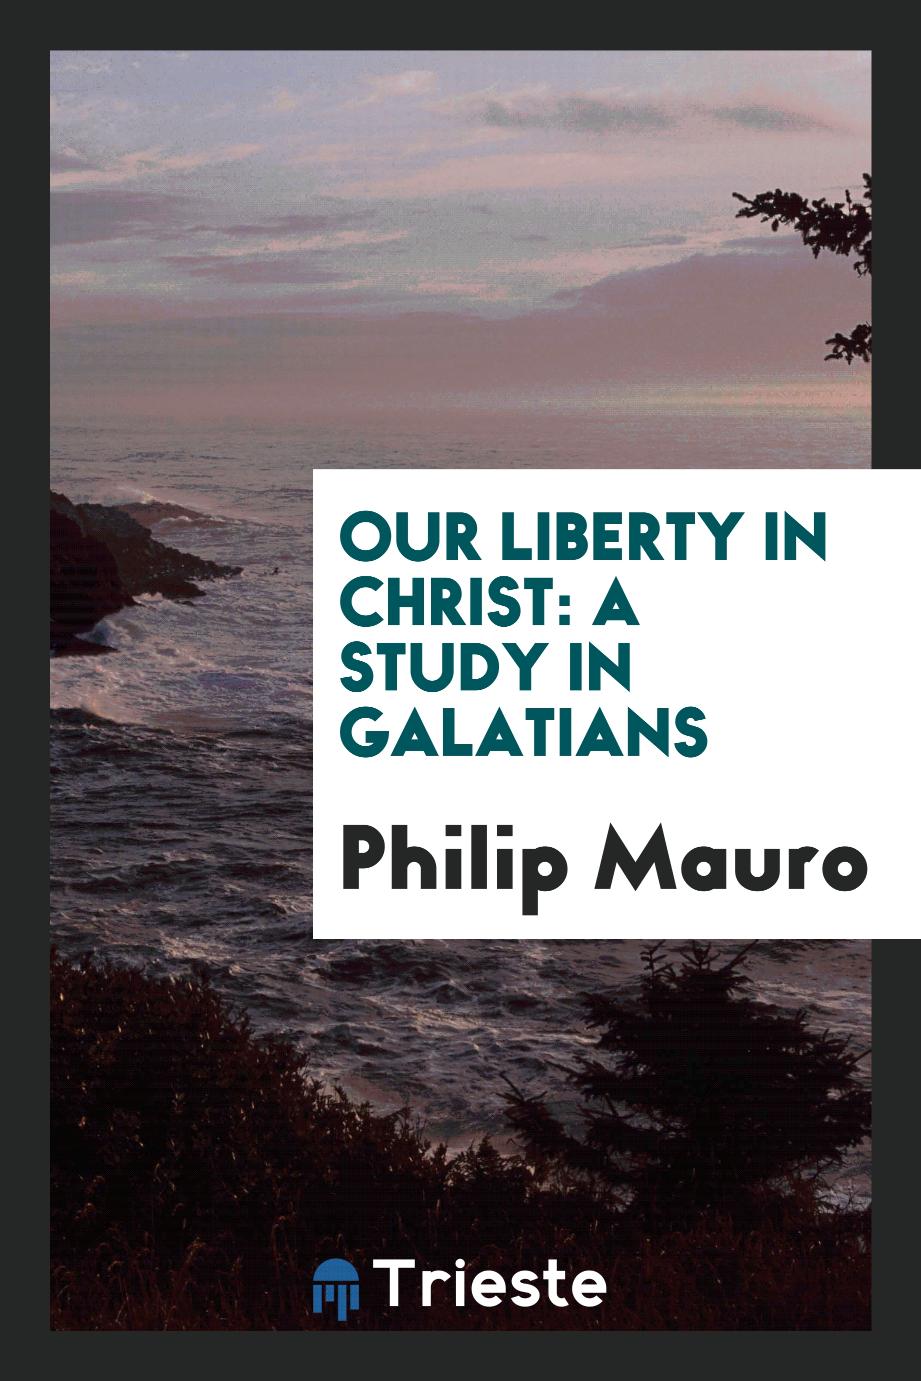 Philip Mauro - Our liberty in Christ: a study in Galatians